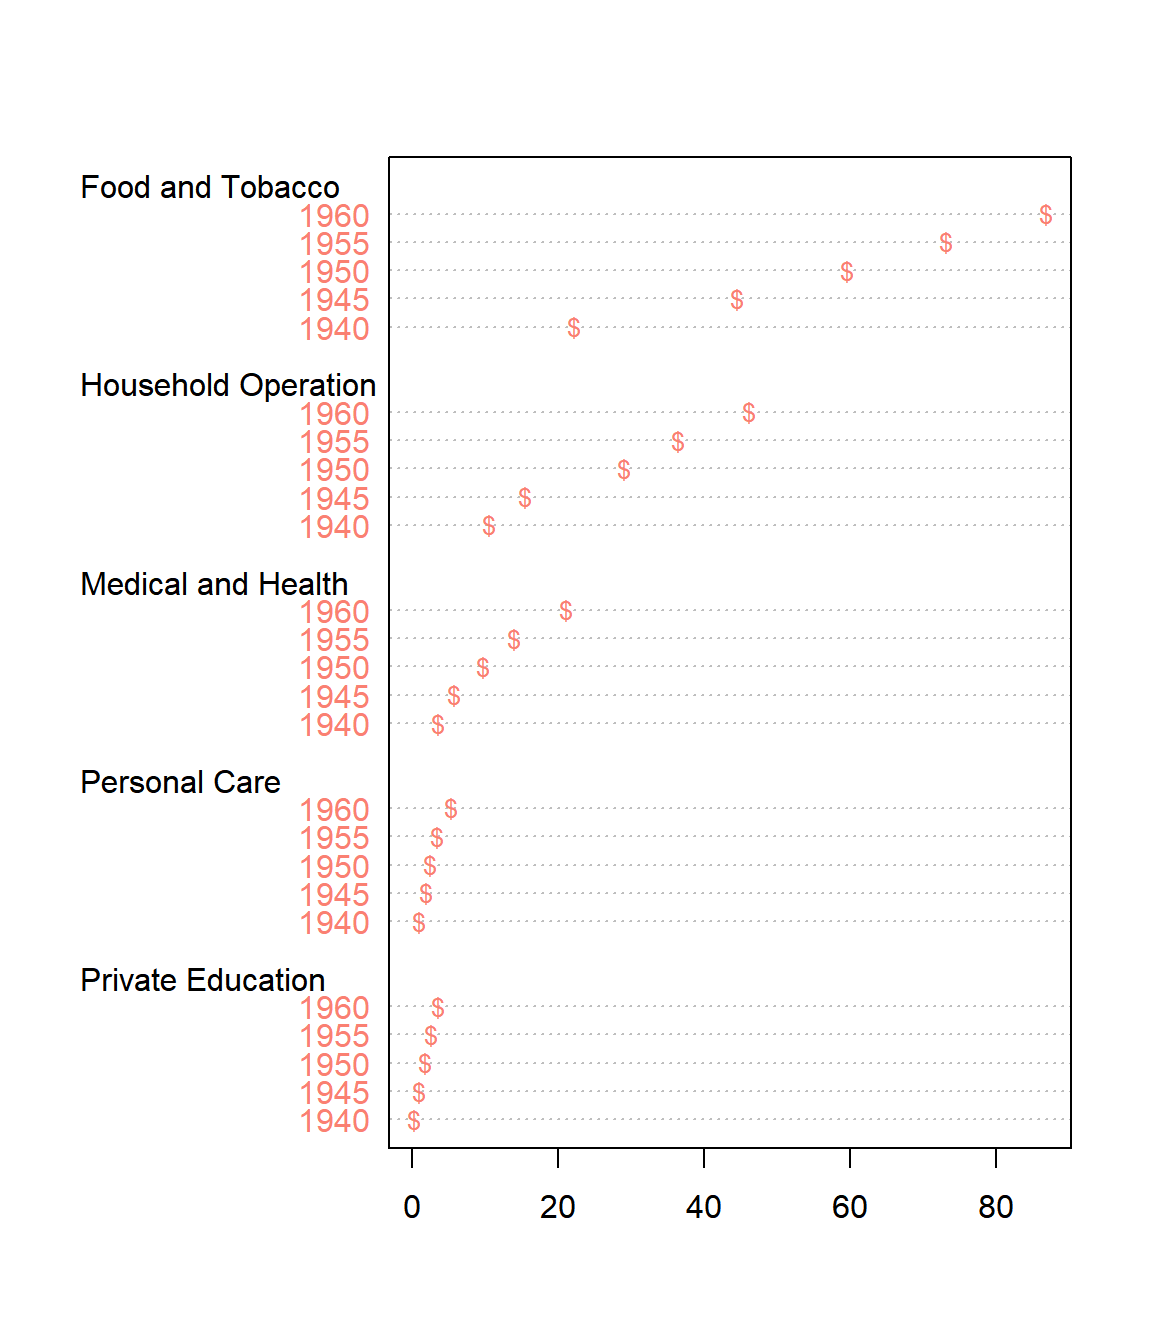 Point Types and Sizes in R - Dot Plot